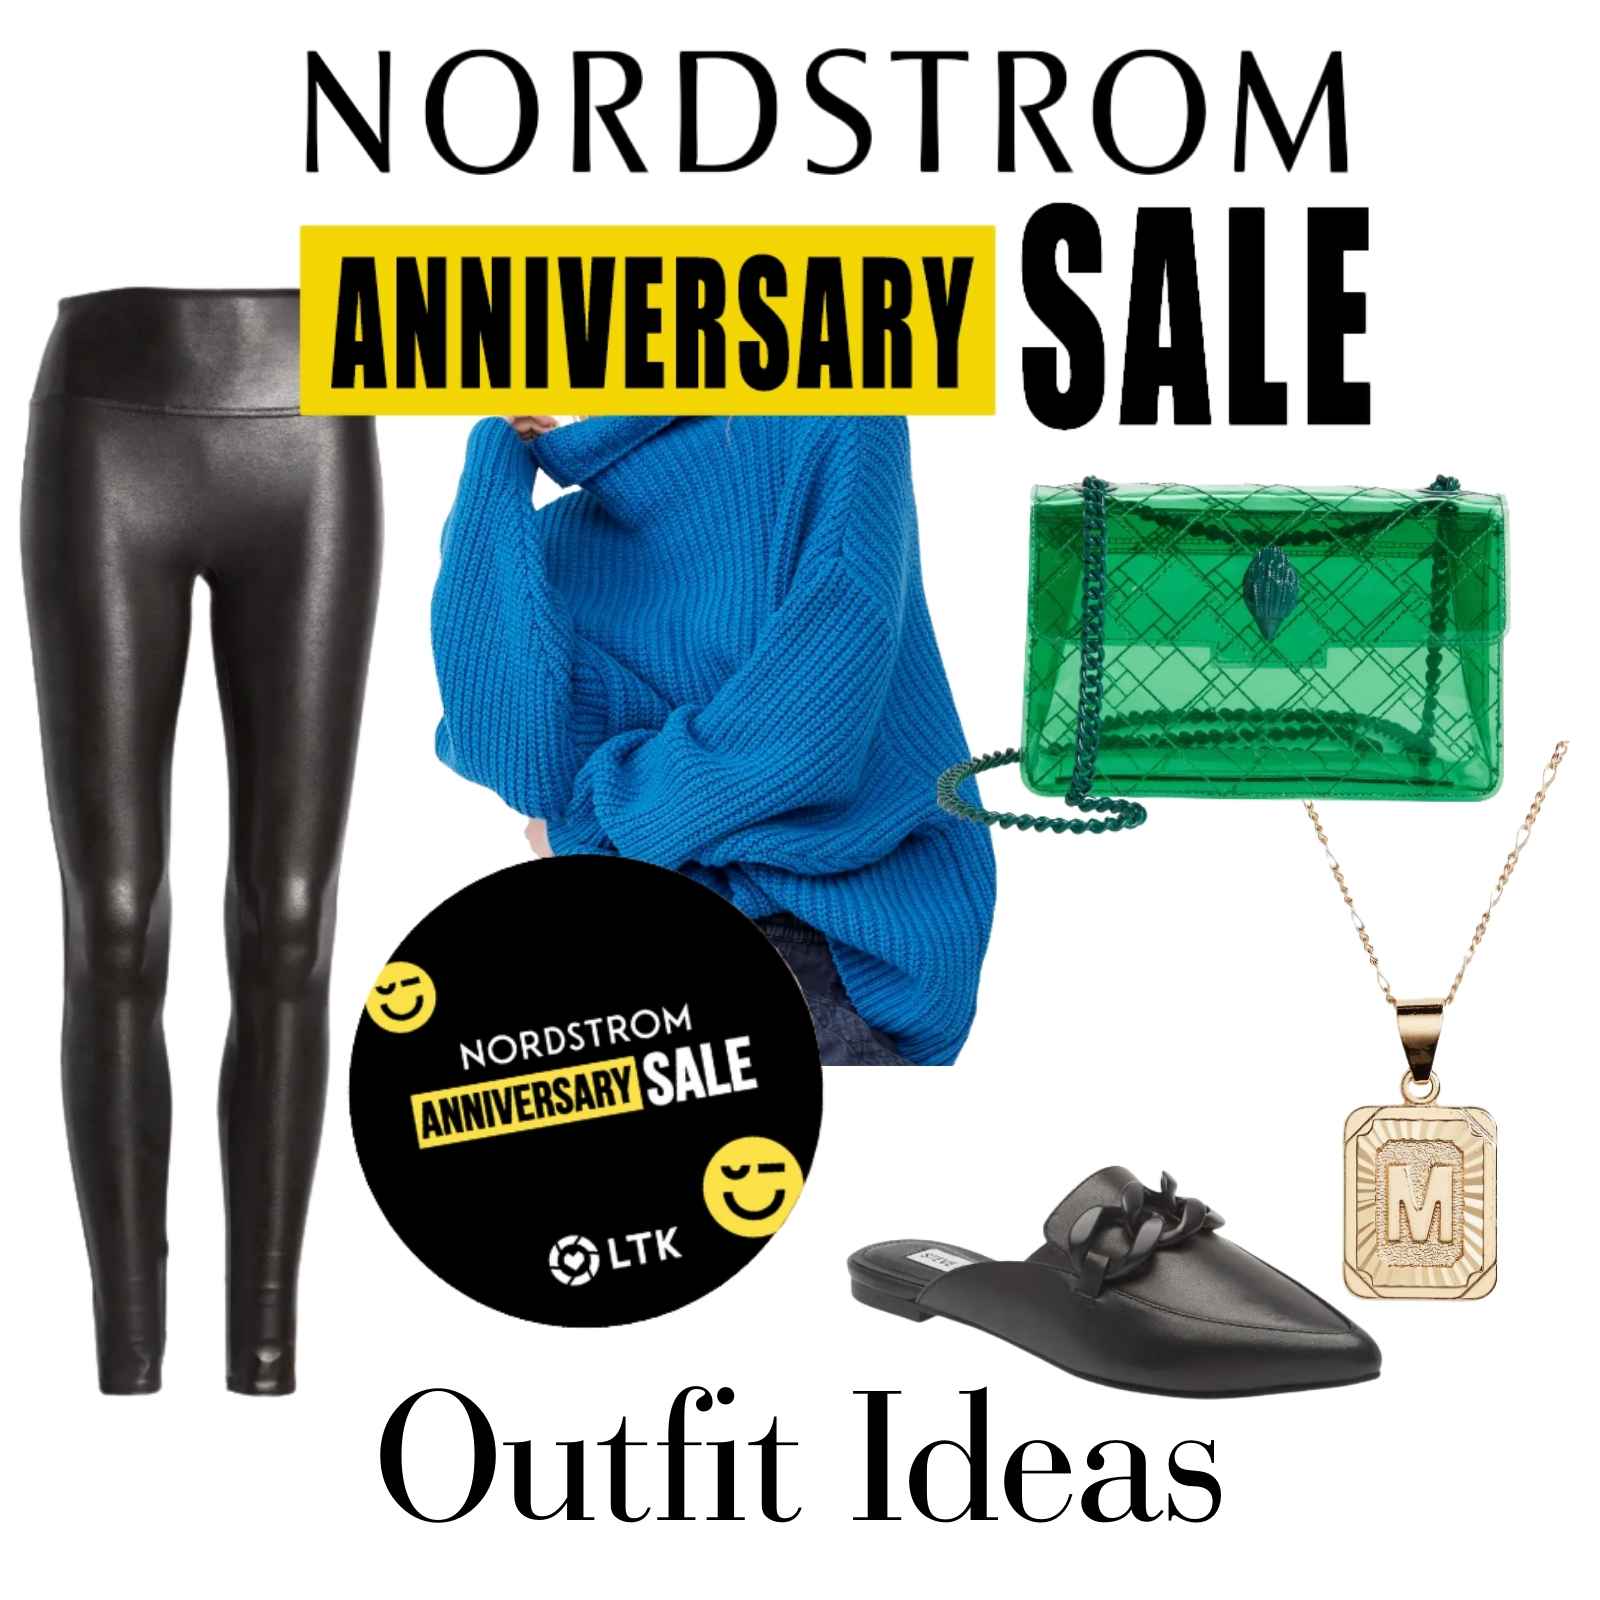 Outfit ideas from Nordstrom Anniversary Sale - blue turtleneck, black faux leather leggings